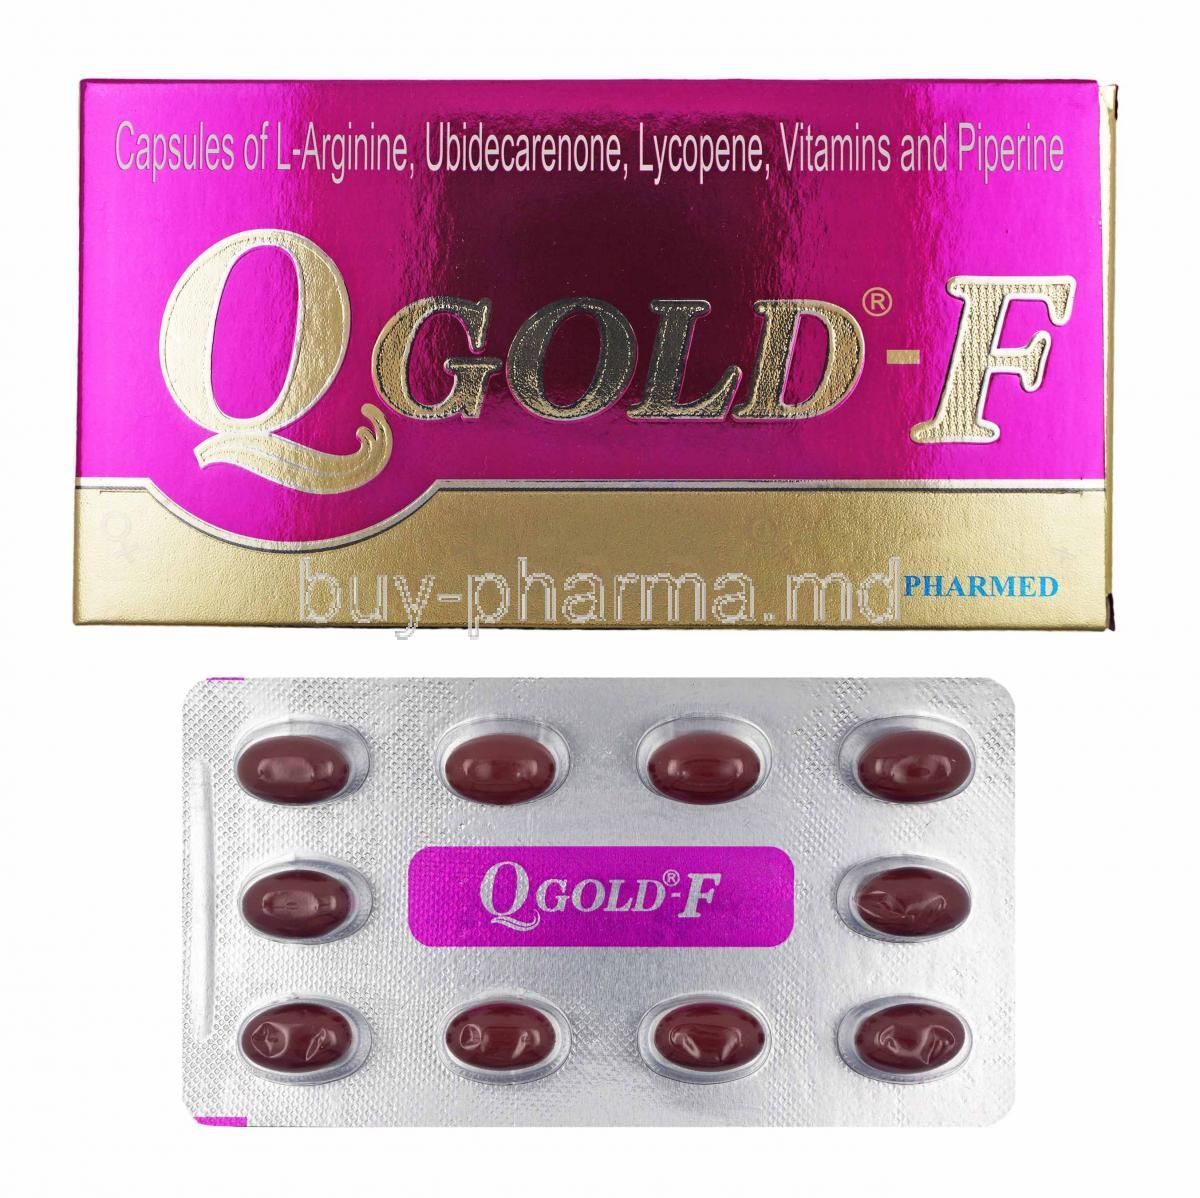 Qgold-F, box and capsules